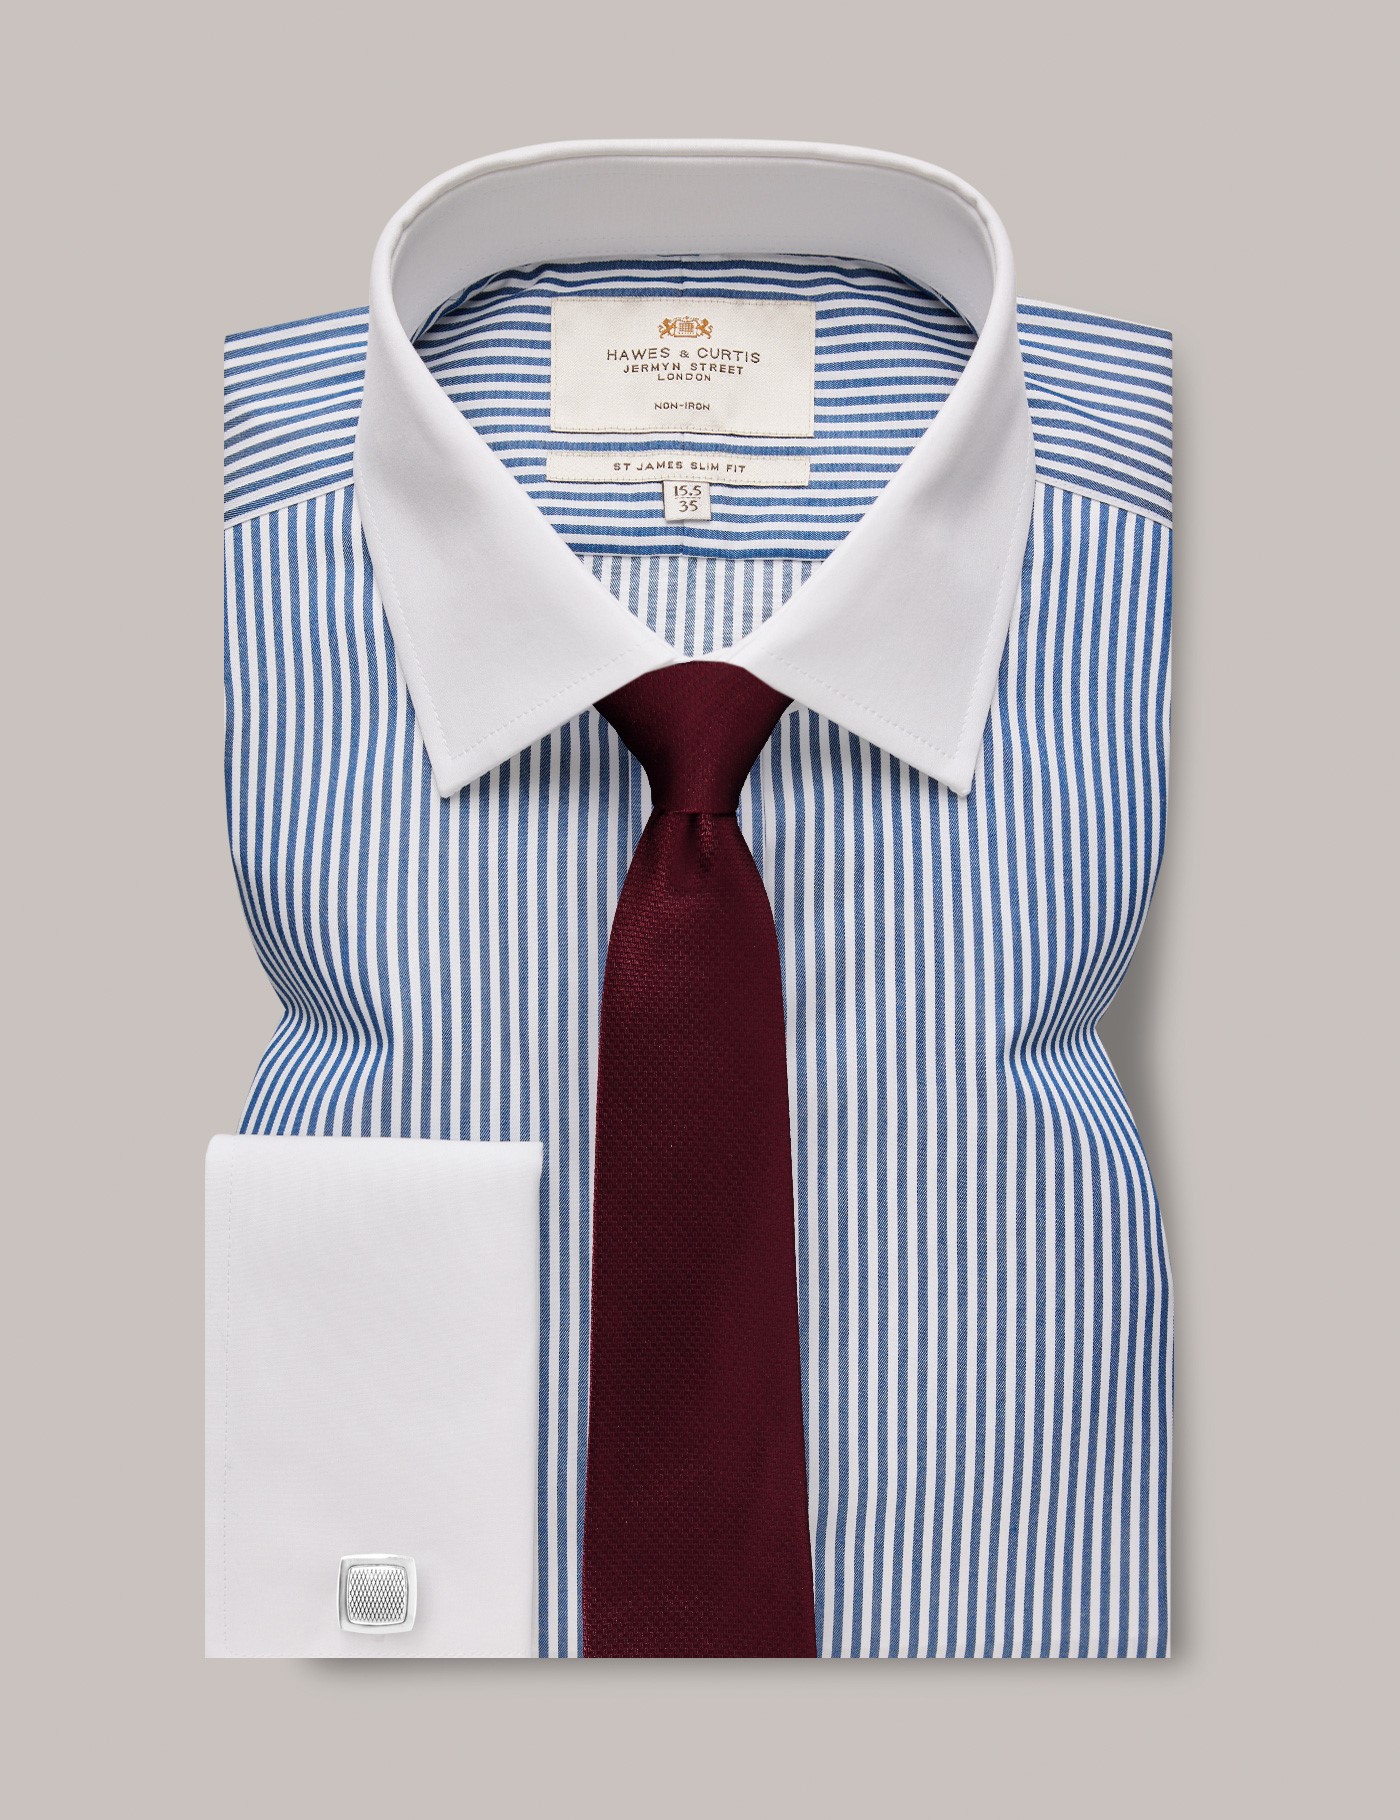 hawes & curtis non-iron navy & white bengal stripe slim shirt - white collar and double cuff